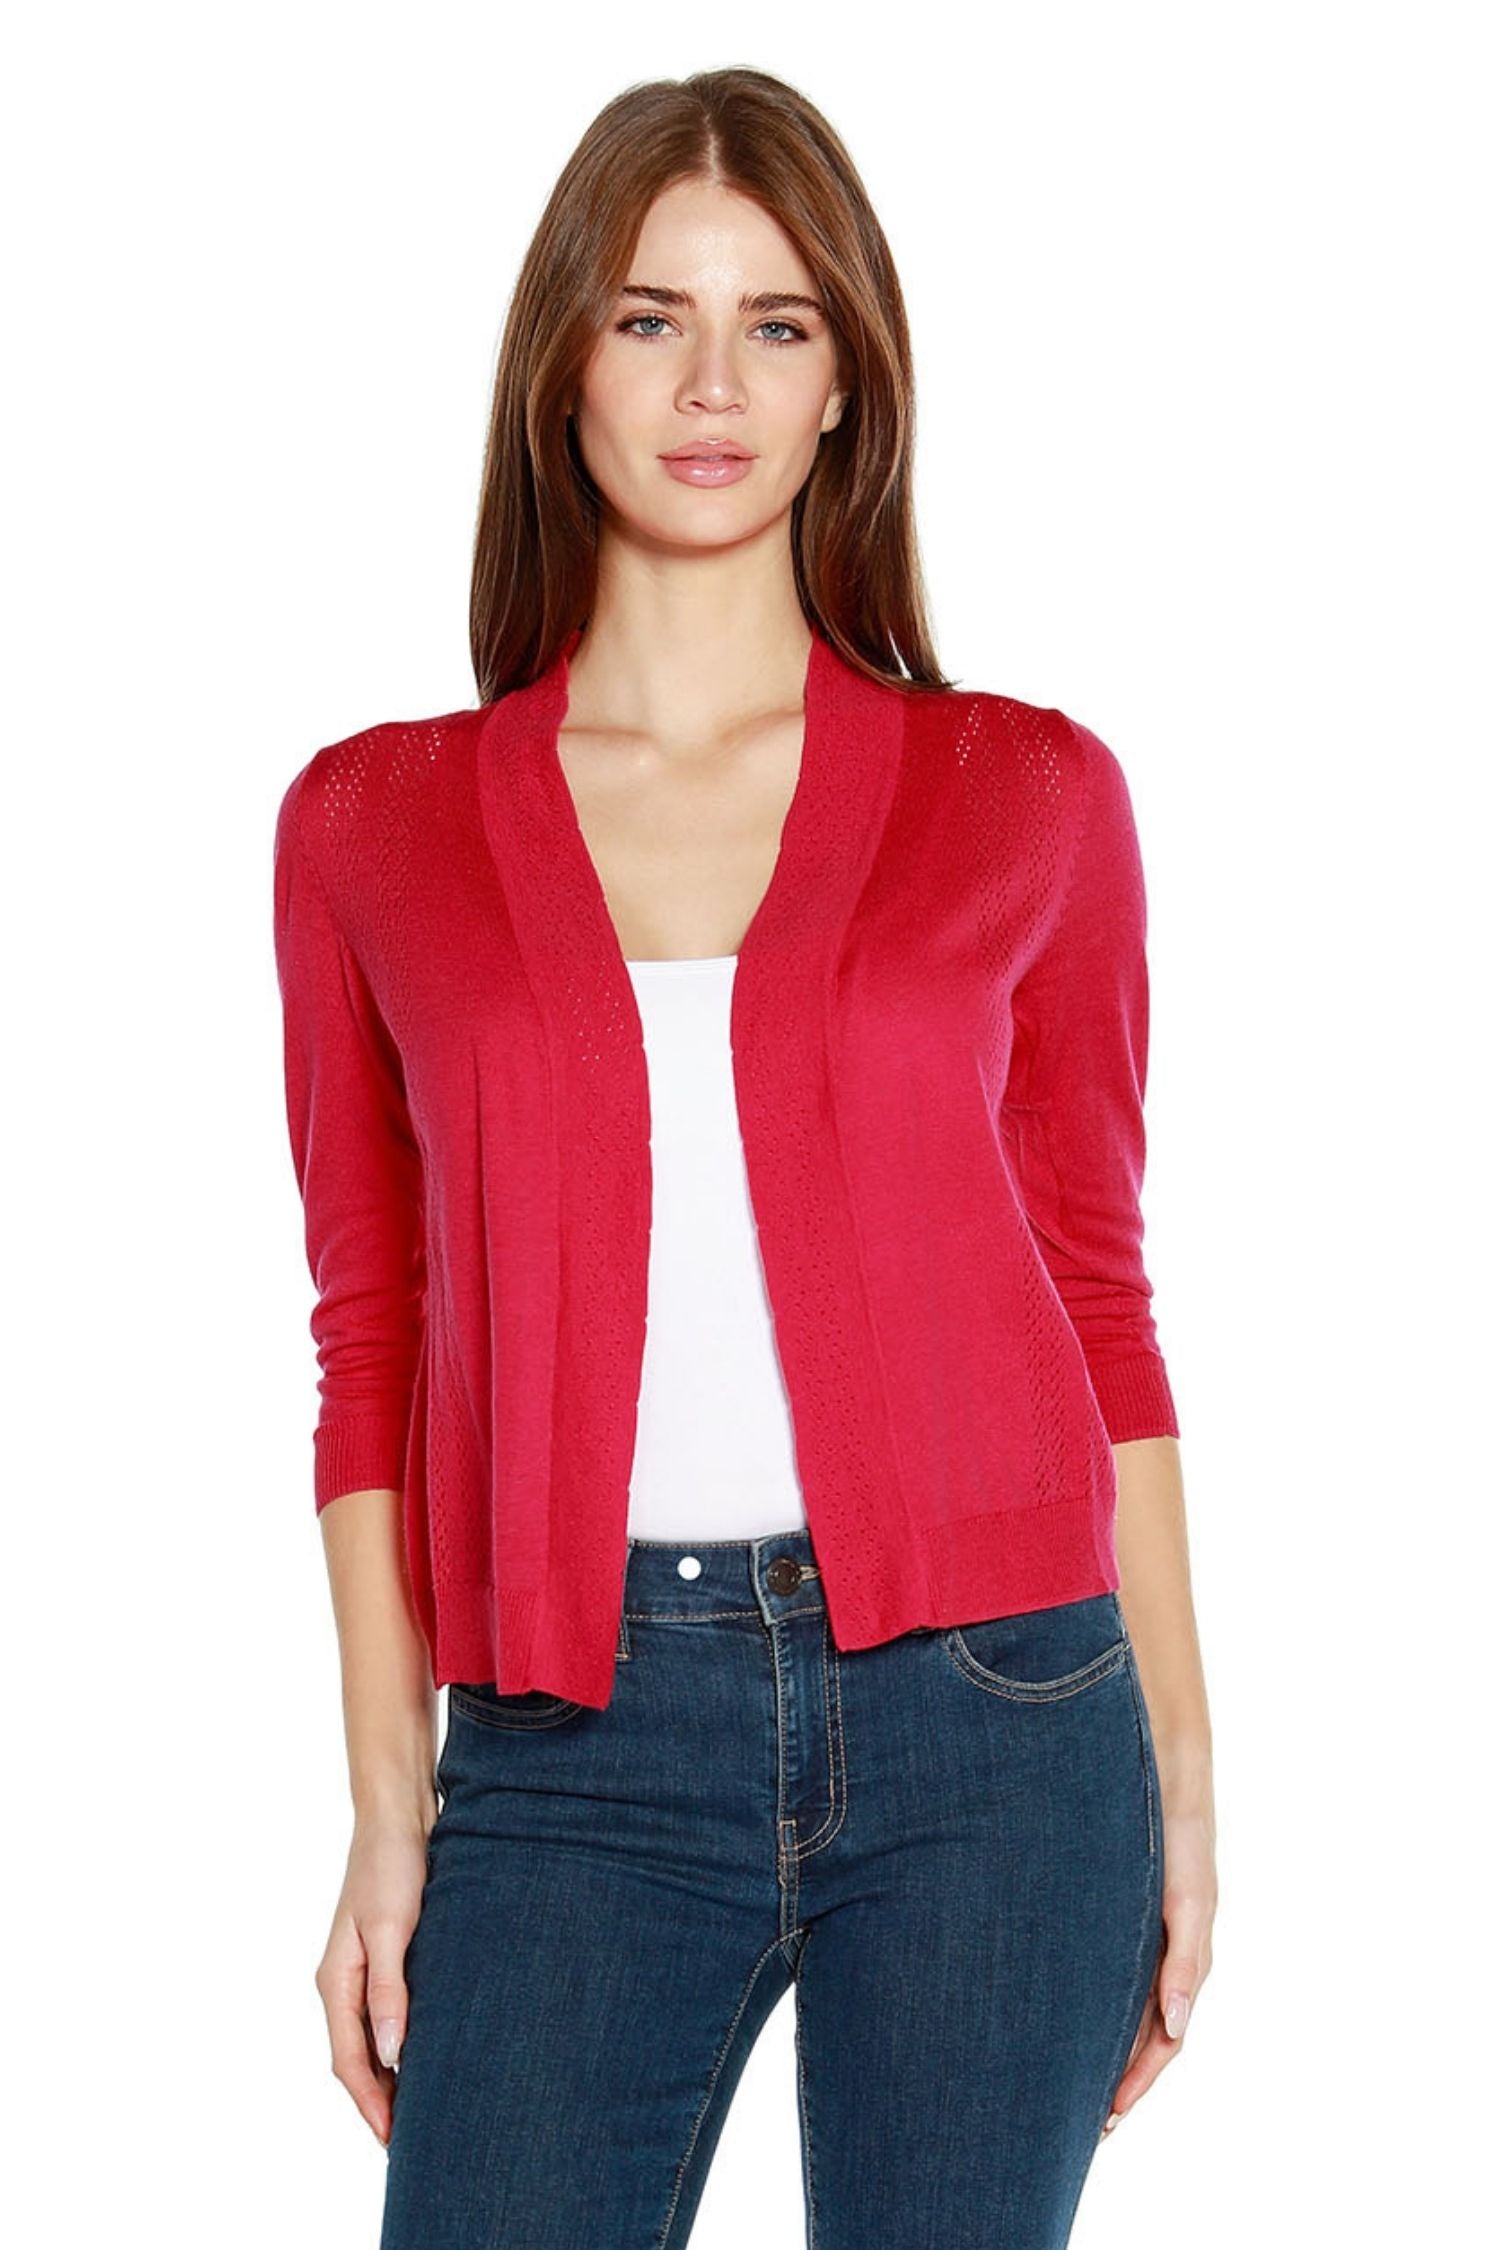 Women’s Light Cropped Cardigan Pointelle Sweater with 3/4 Sleeves